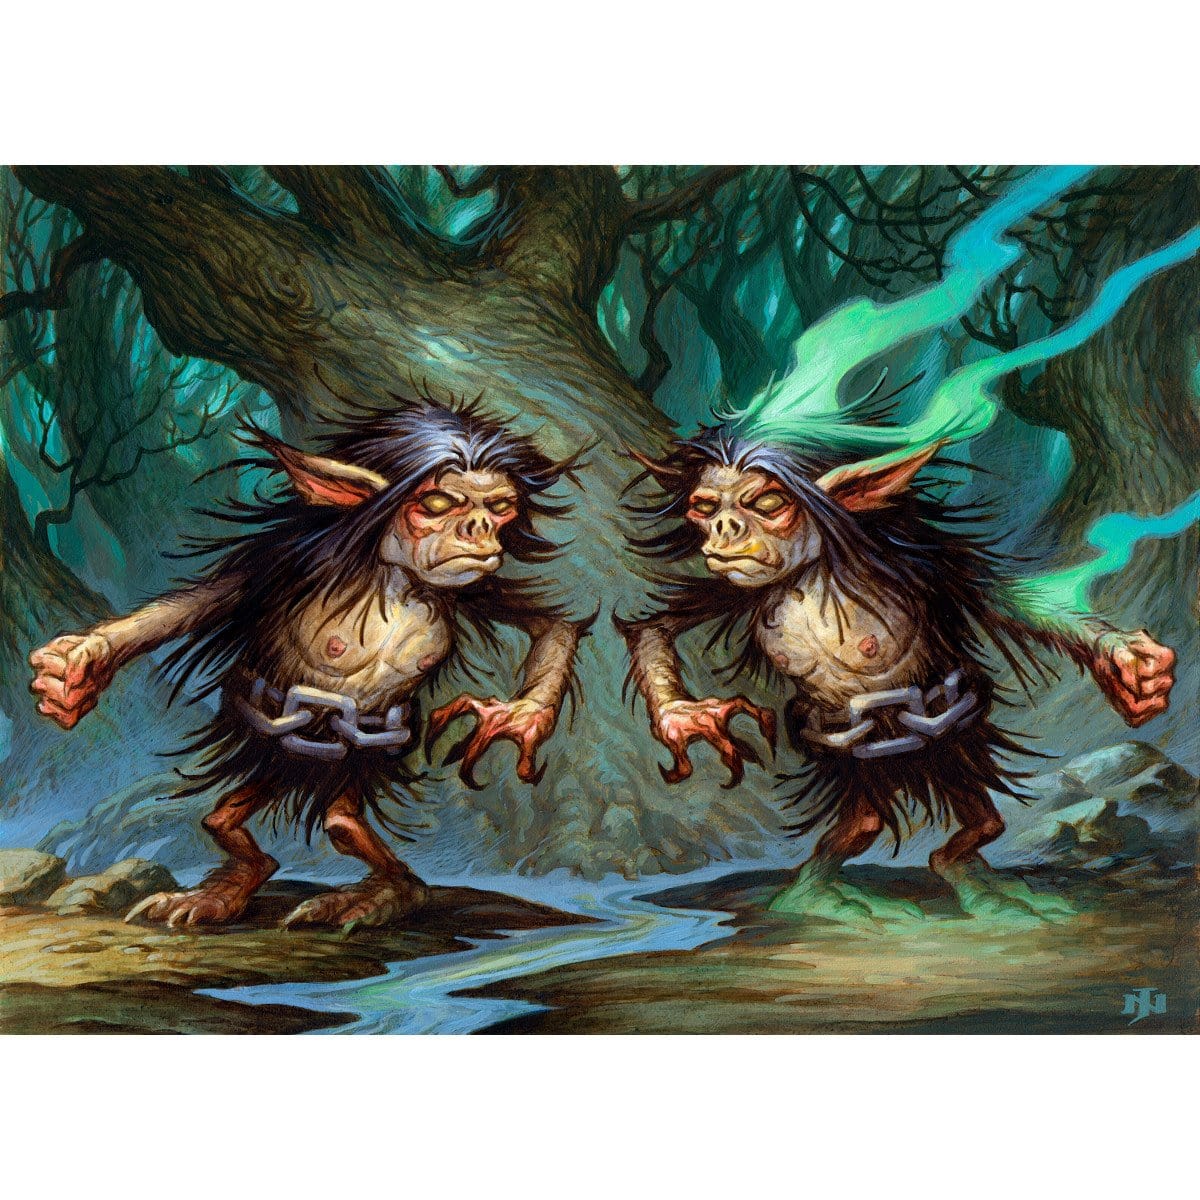 Spitting Image Print - Print - Original Magic Art - Accessories for Magic the Gathering and other card games